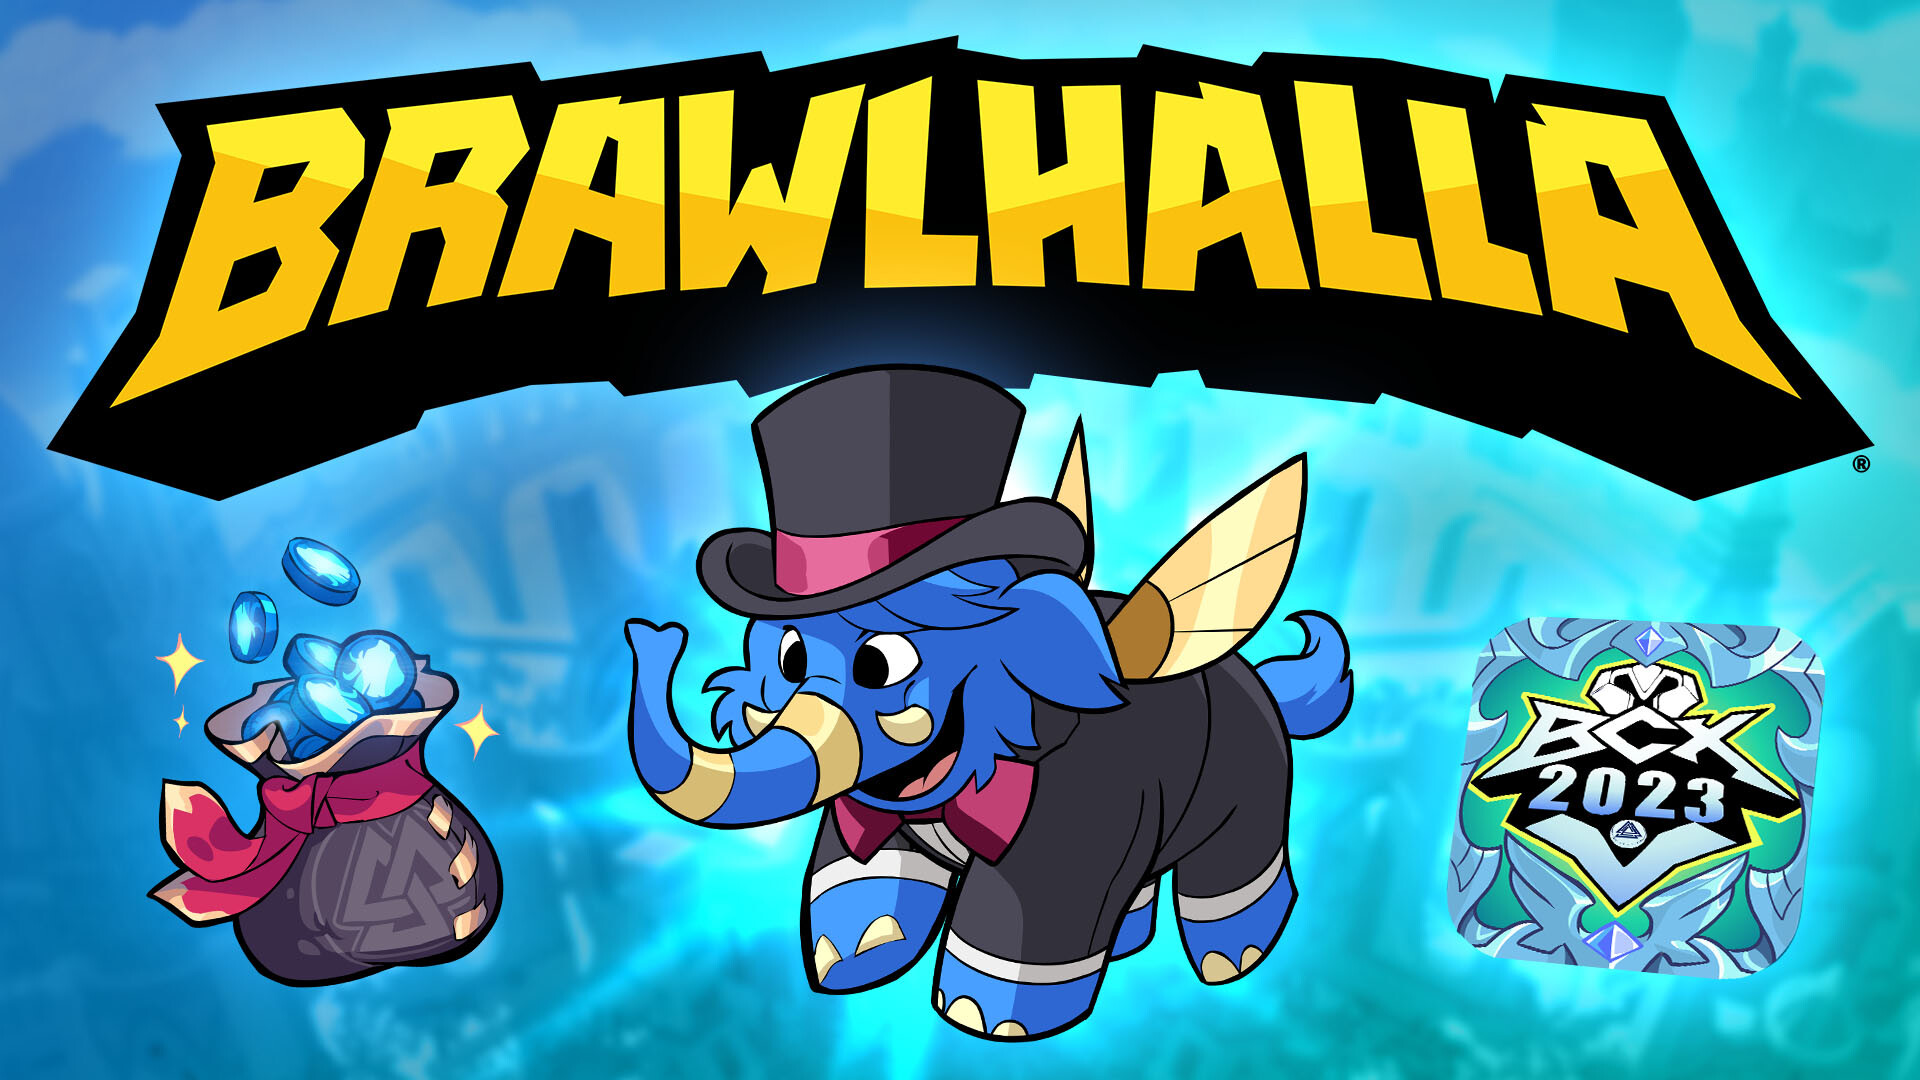 Bloomhalla 2023 Has Arrived! · Brawlhalla update for 10 May 2023 · SteamDB